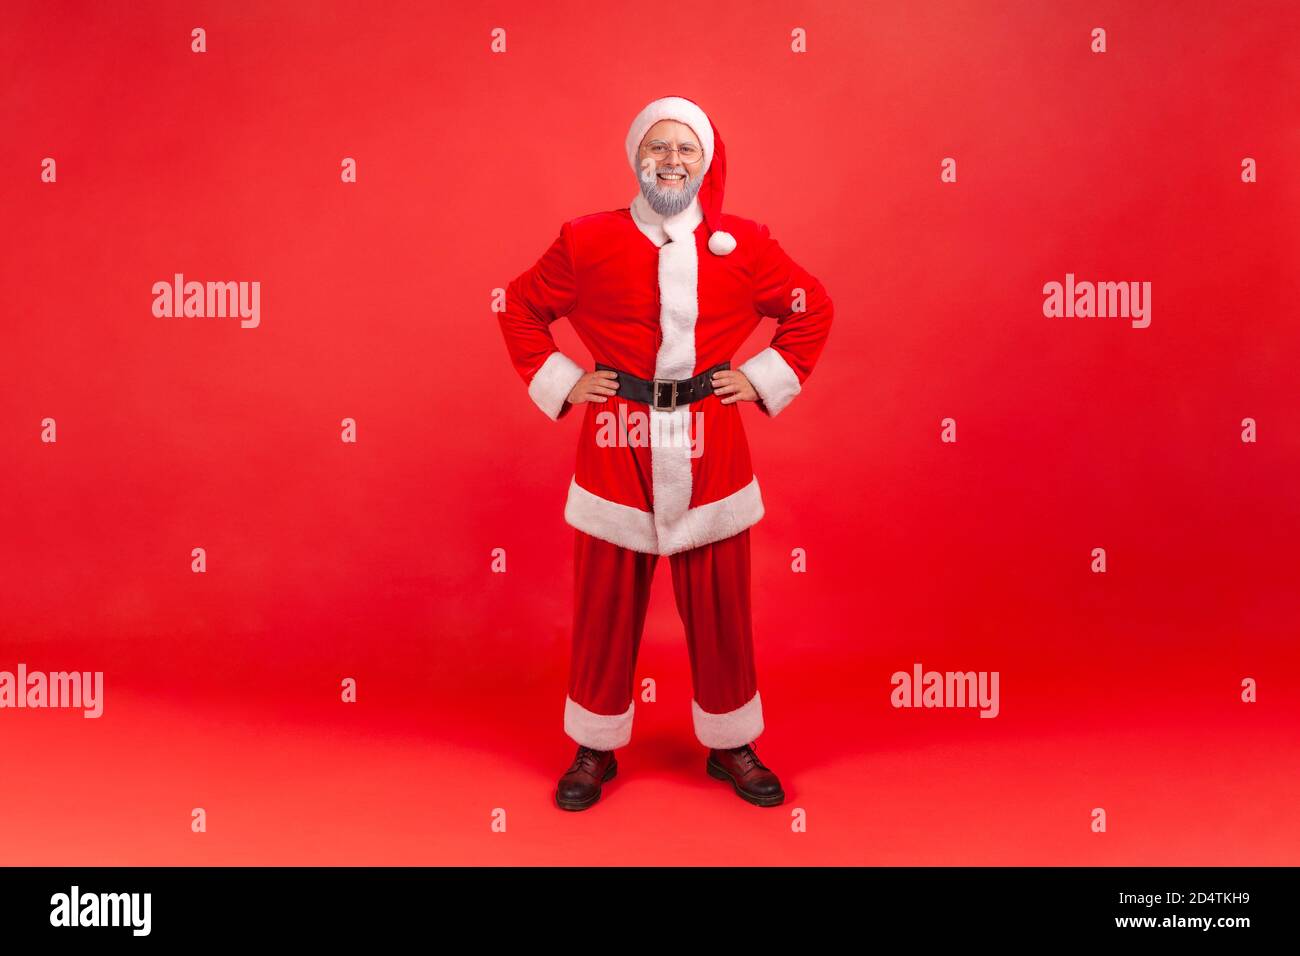 Full length portrait of positive happy aged man in santa claus costume standing holding hands akimbo, preparing for winter holidays and toothy smile. Stock Photo